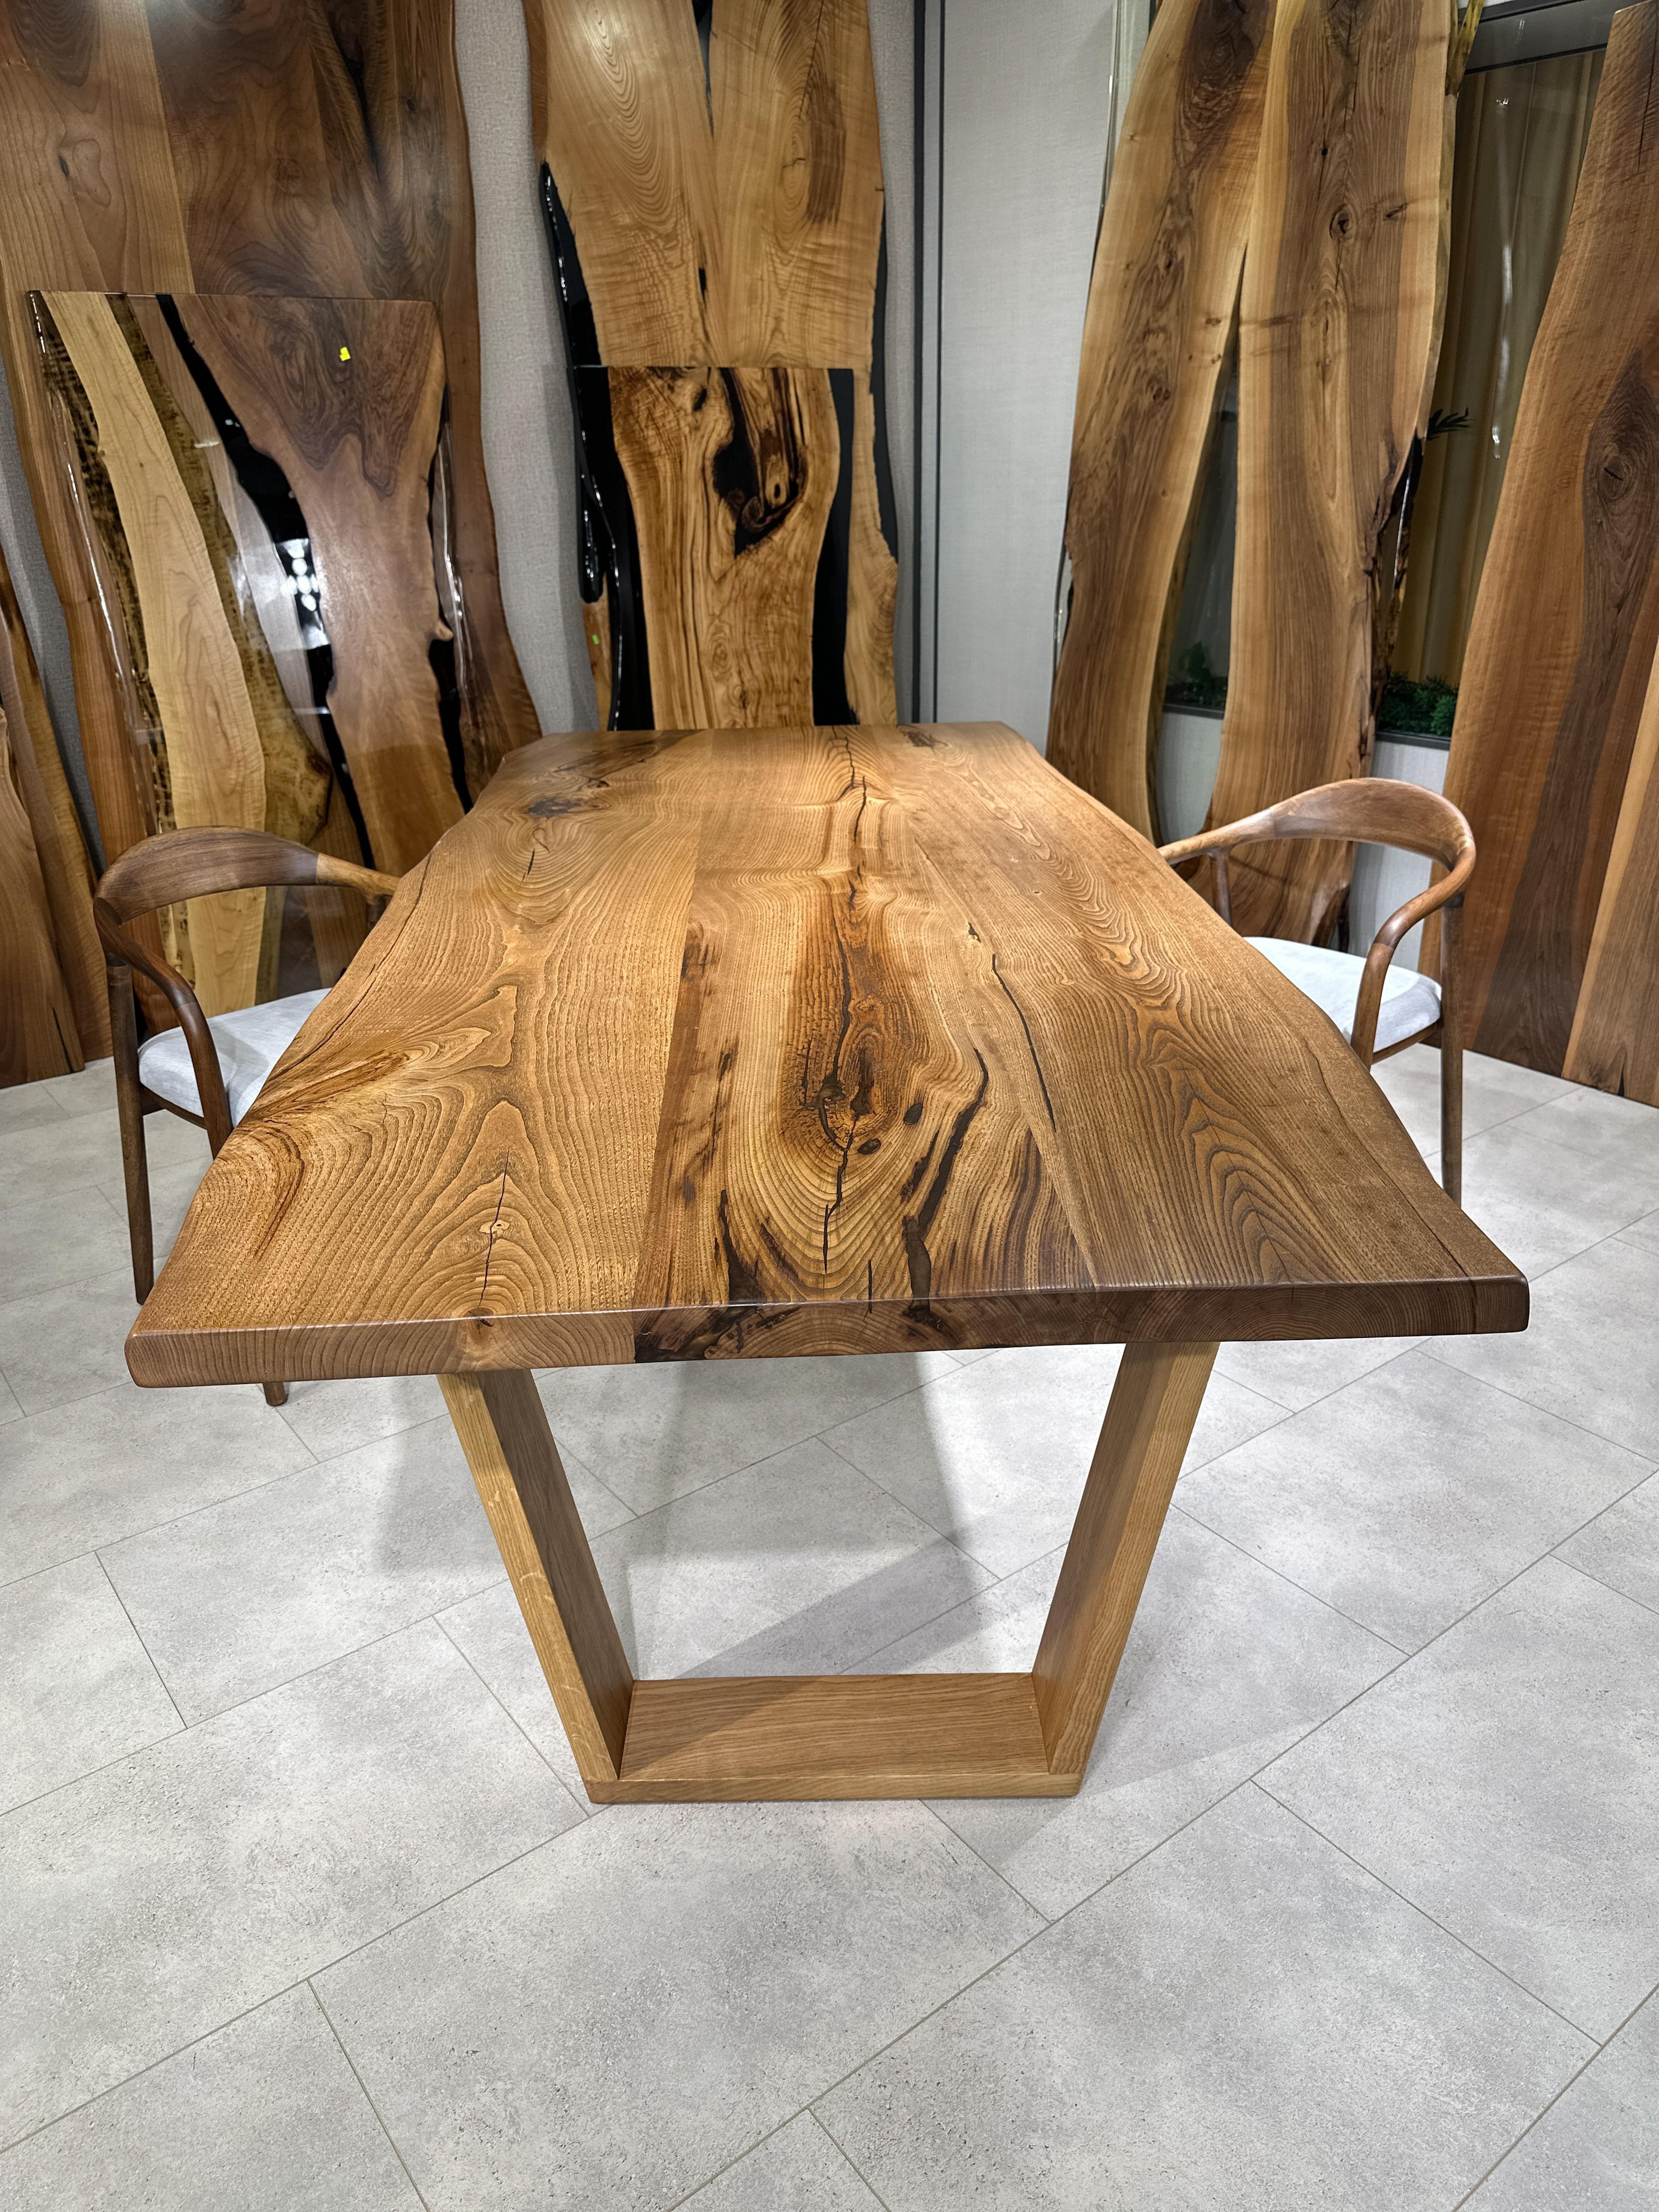 Custom Chesnut Live Edge Epoxy Resin Dining Table

This table is made of Walnut Wood. The grains and texture of the wood describe what a natural walnut woods looks like.
It can be used as a dining table or as a conference table. Suitable for indoor